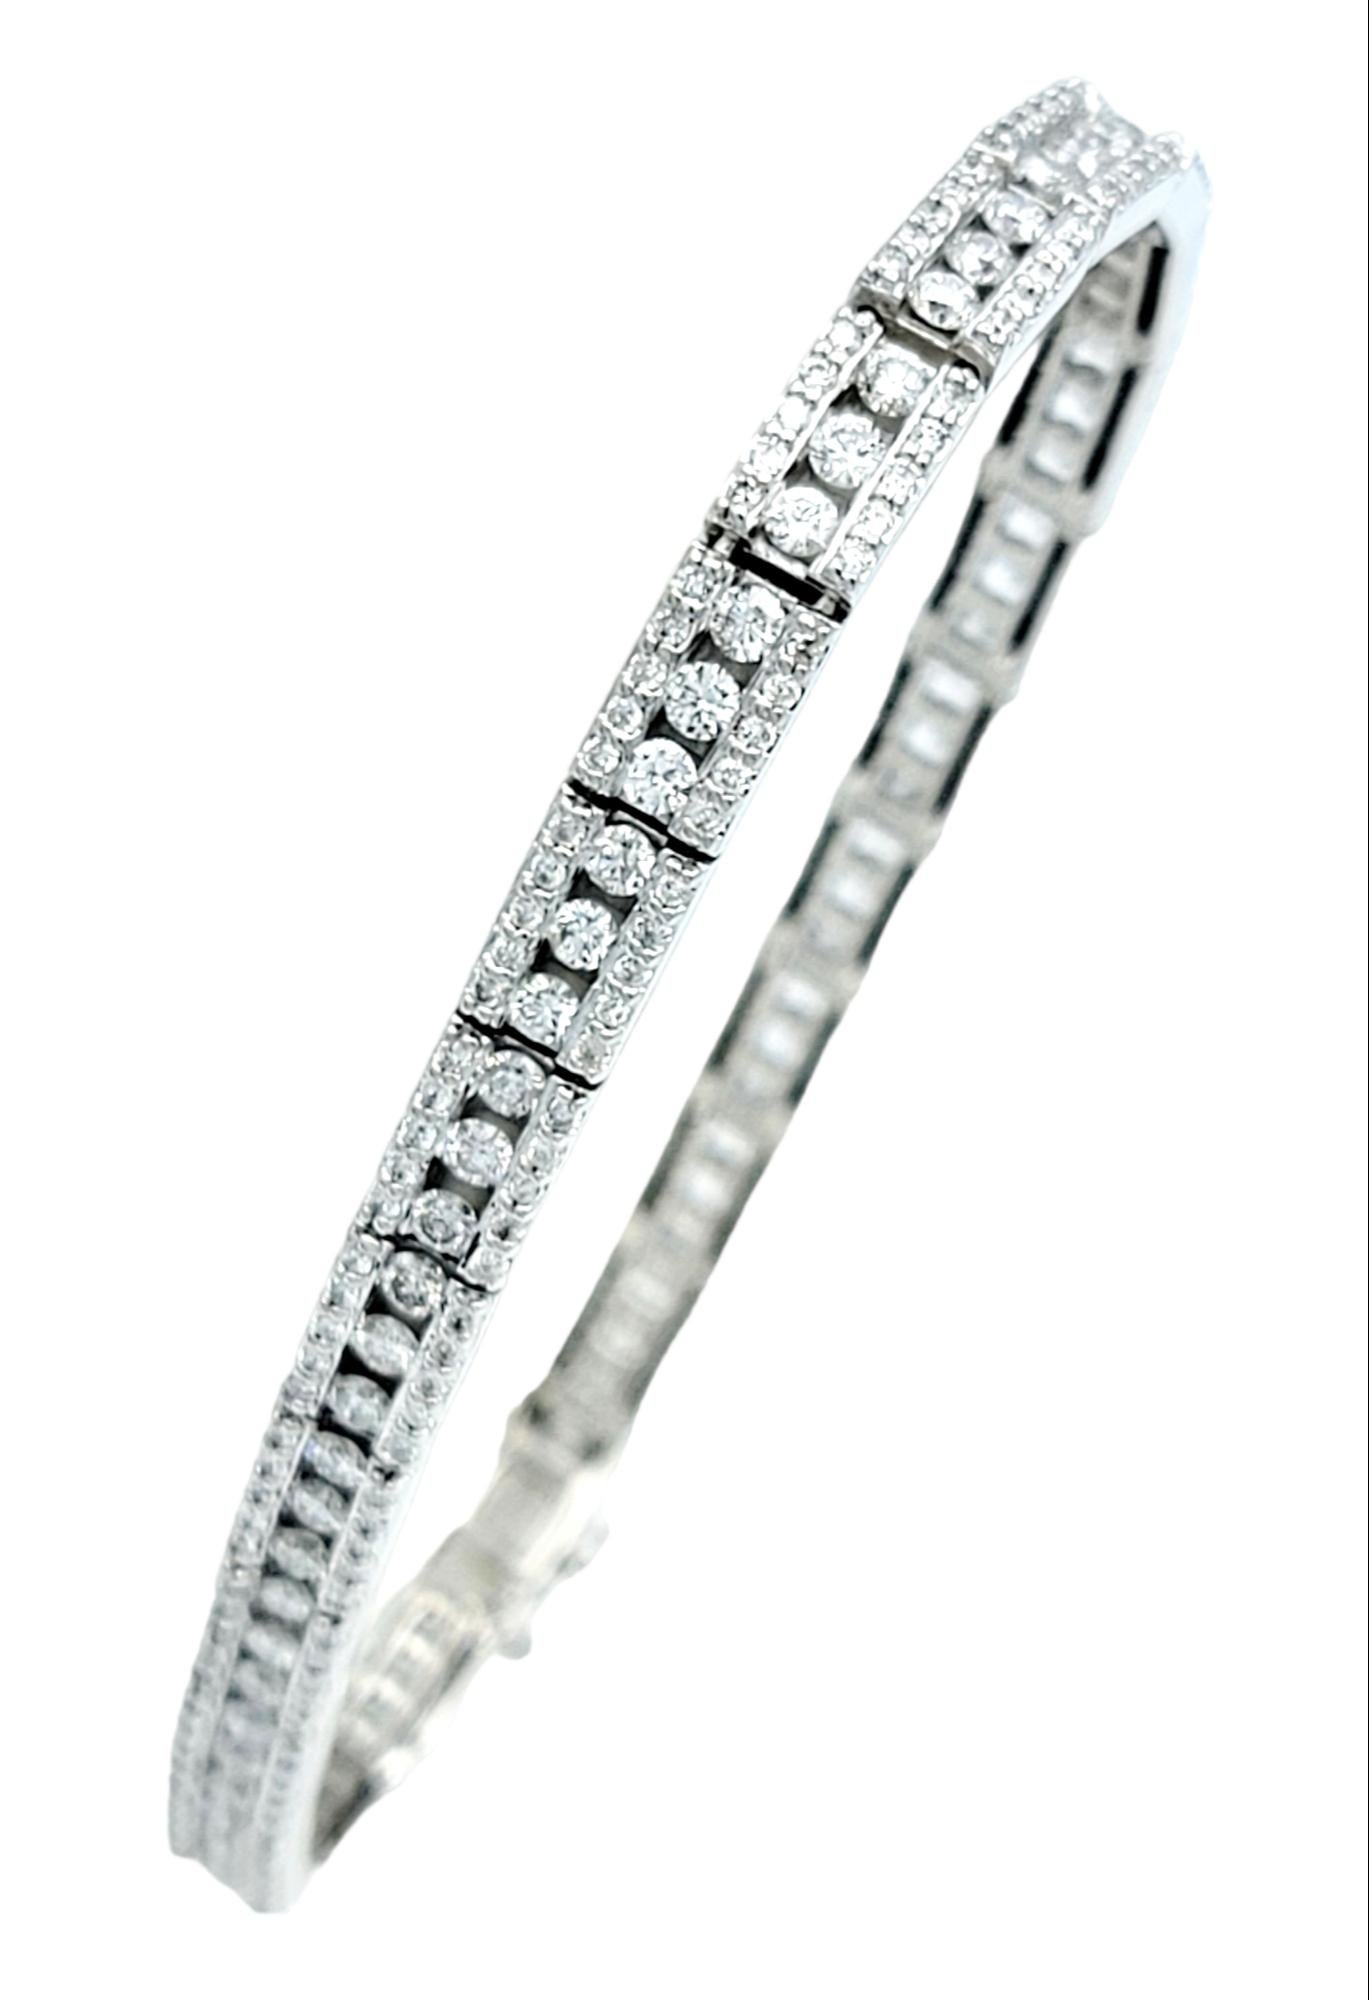 Introducing an exquisite three-row diamond tennis bracelet in elegant 14 karat white gold. This dazzling piece combines timeless sophistication with a touch of modern allure.

At the heart of each link rests three brilliant round diamonds, their